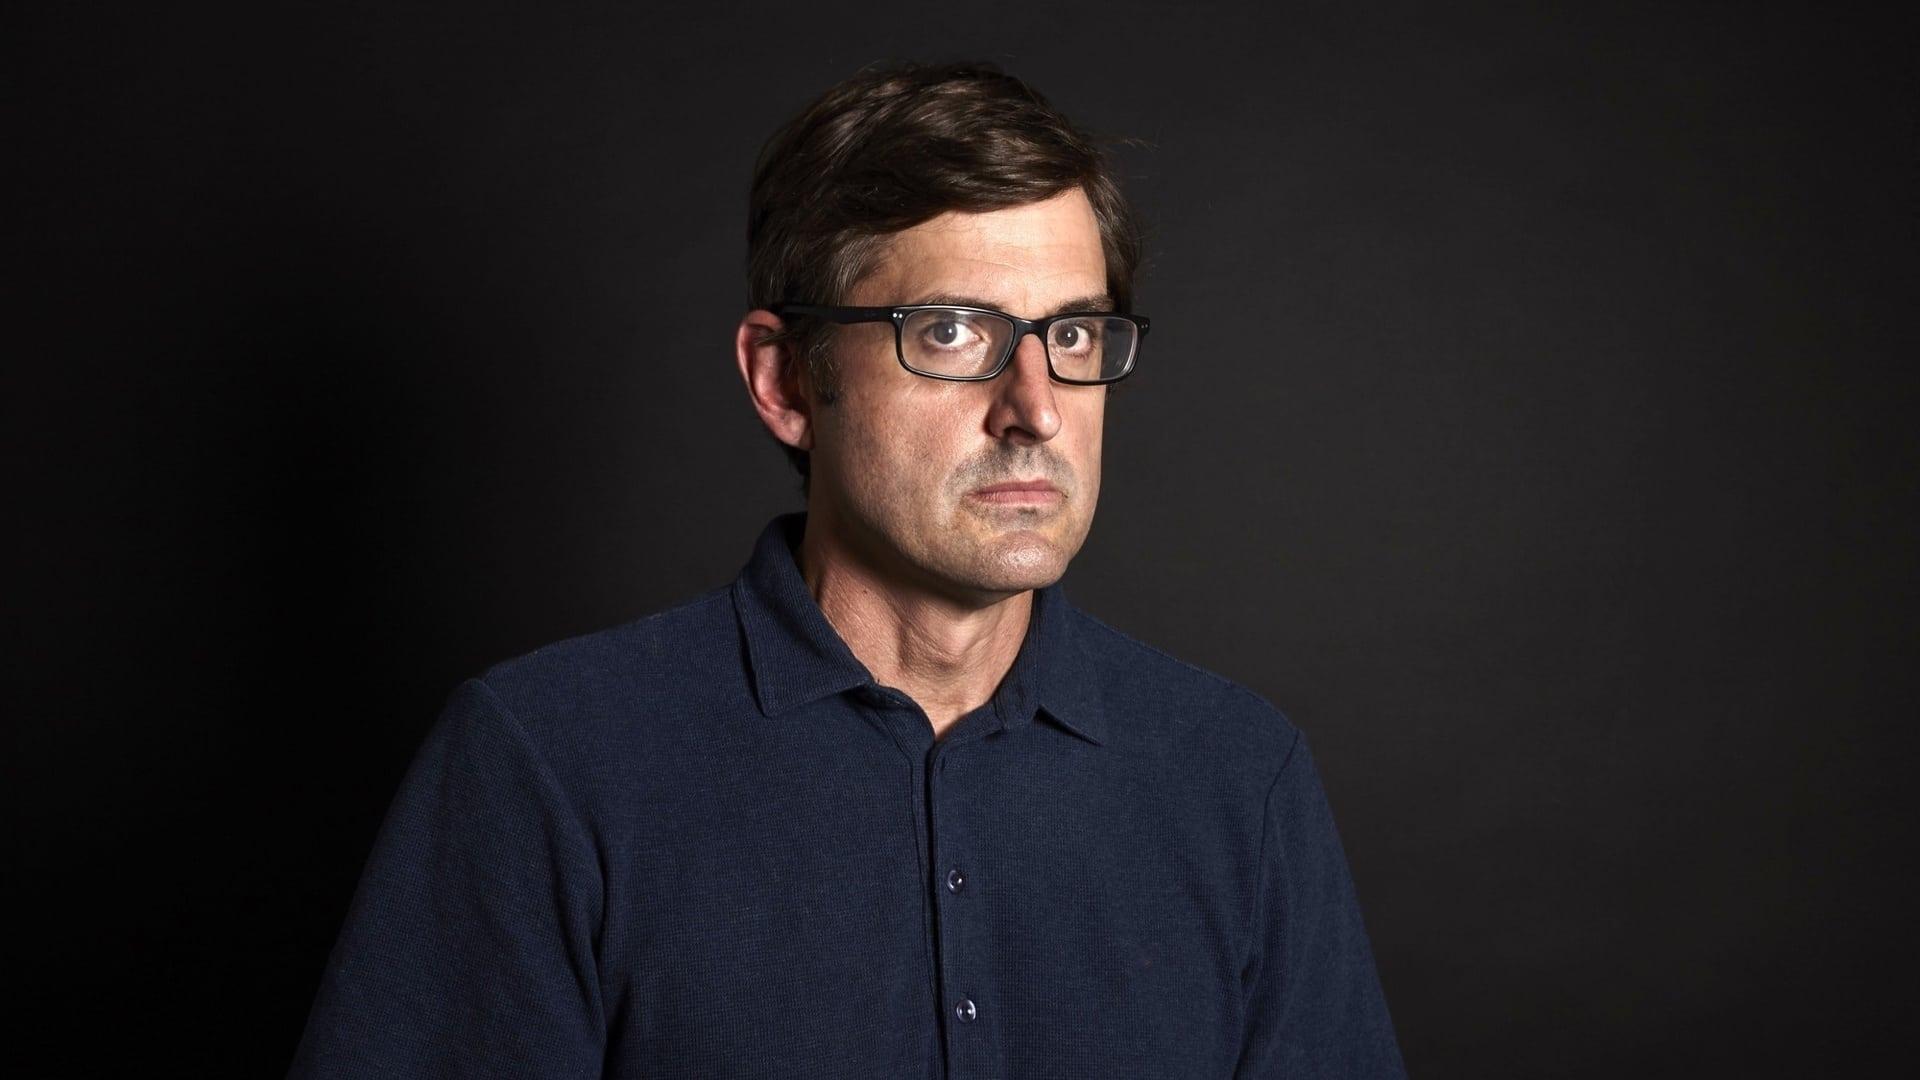 Louis Theroux: America's Medicated Kids backdrop